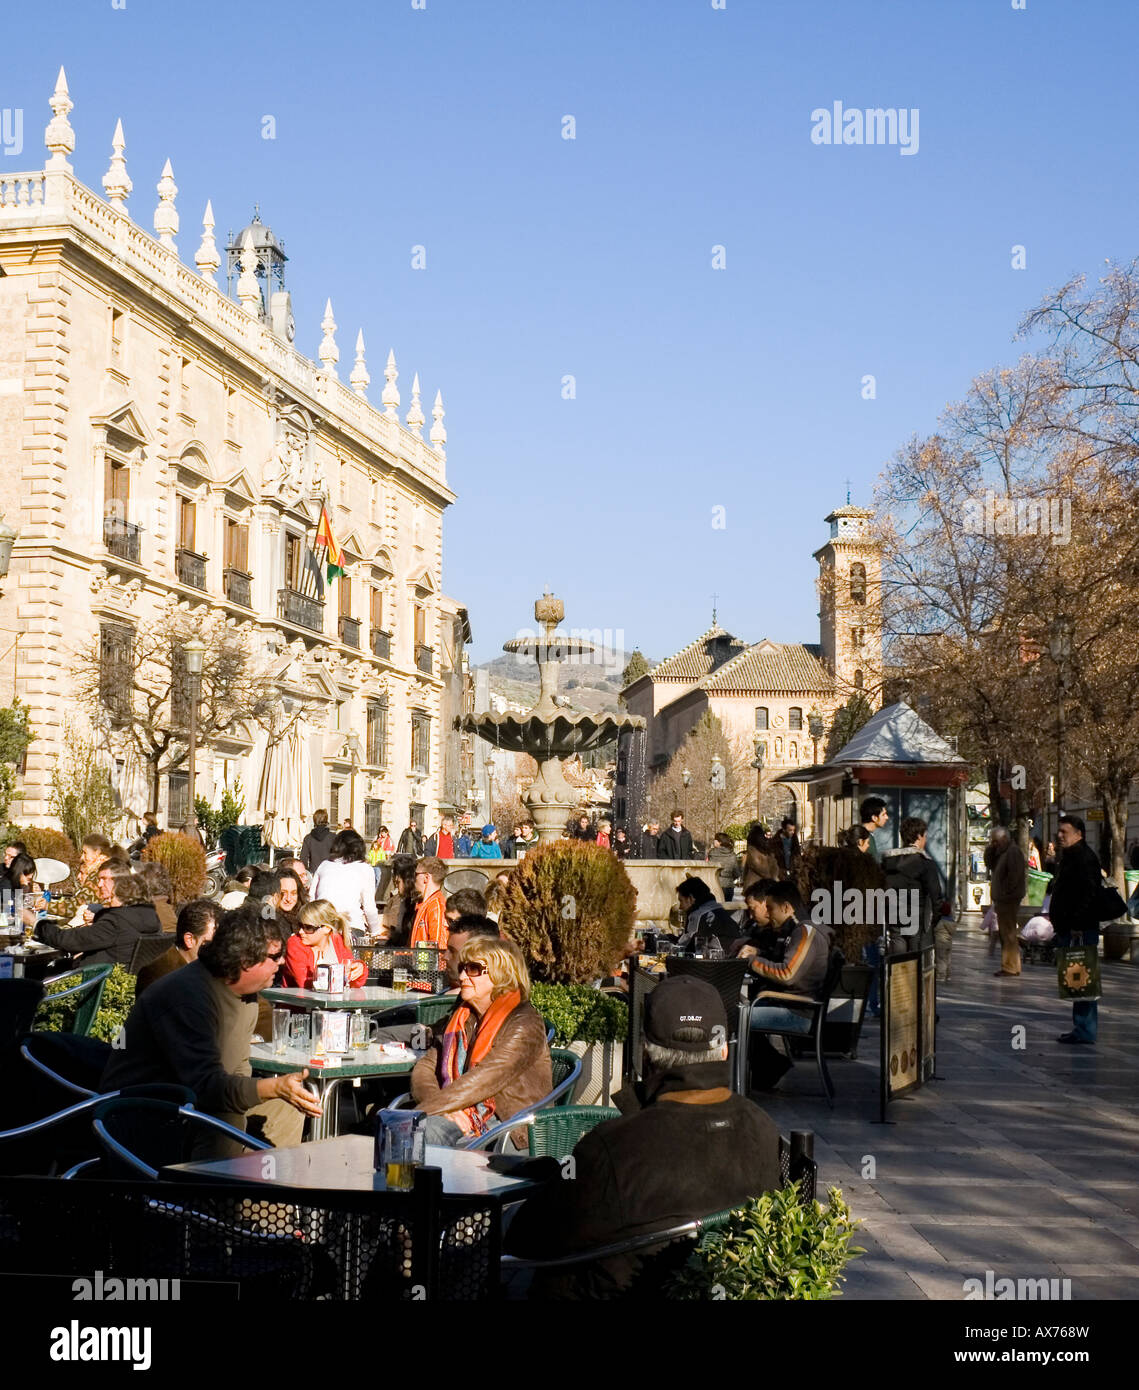 Granada Spain Plaza Nueva View of Royal Chancellery and street cafe Stock Photo